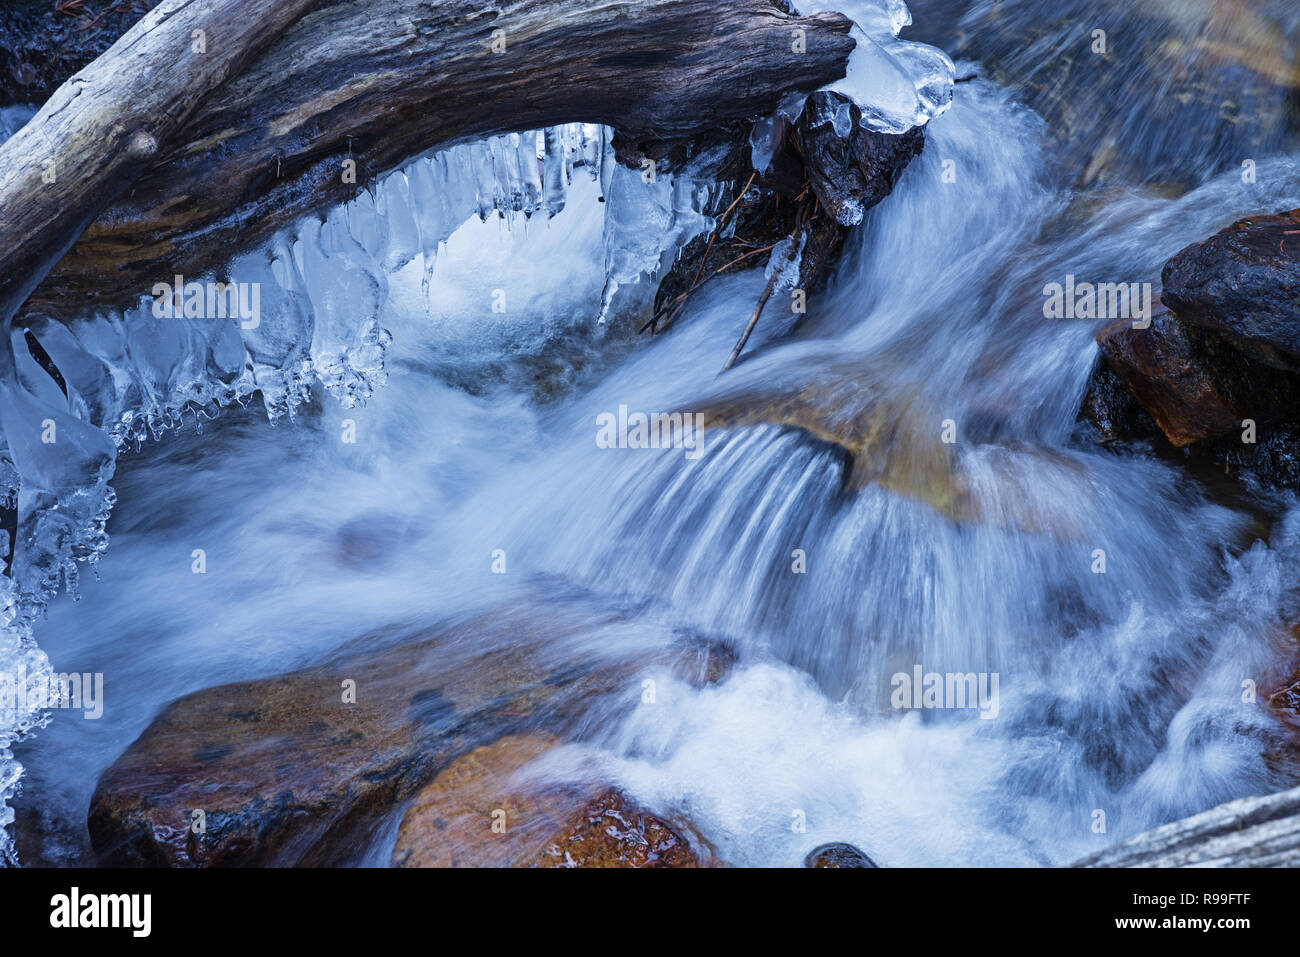 winter whitewater stream with silky flowing water and icicles Stock Photo